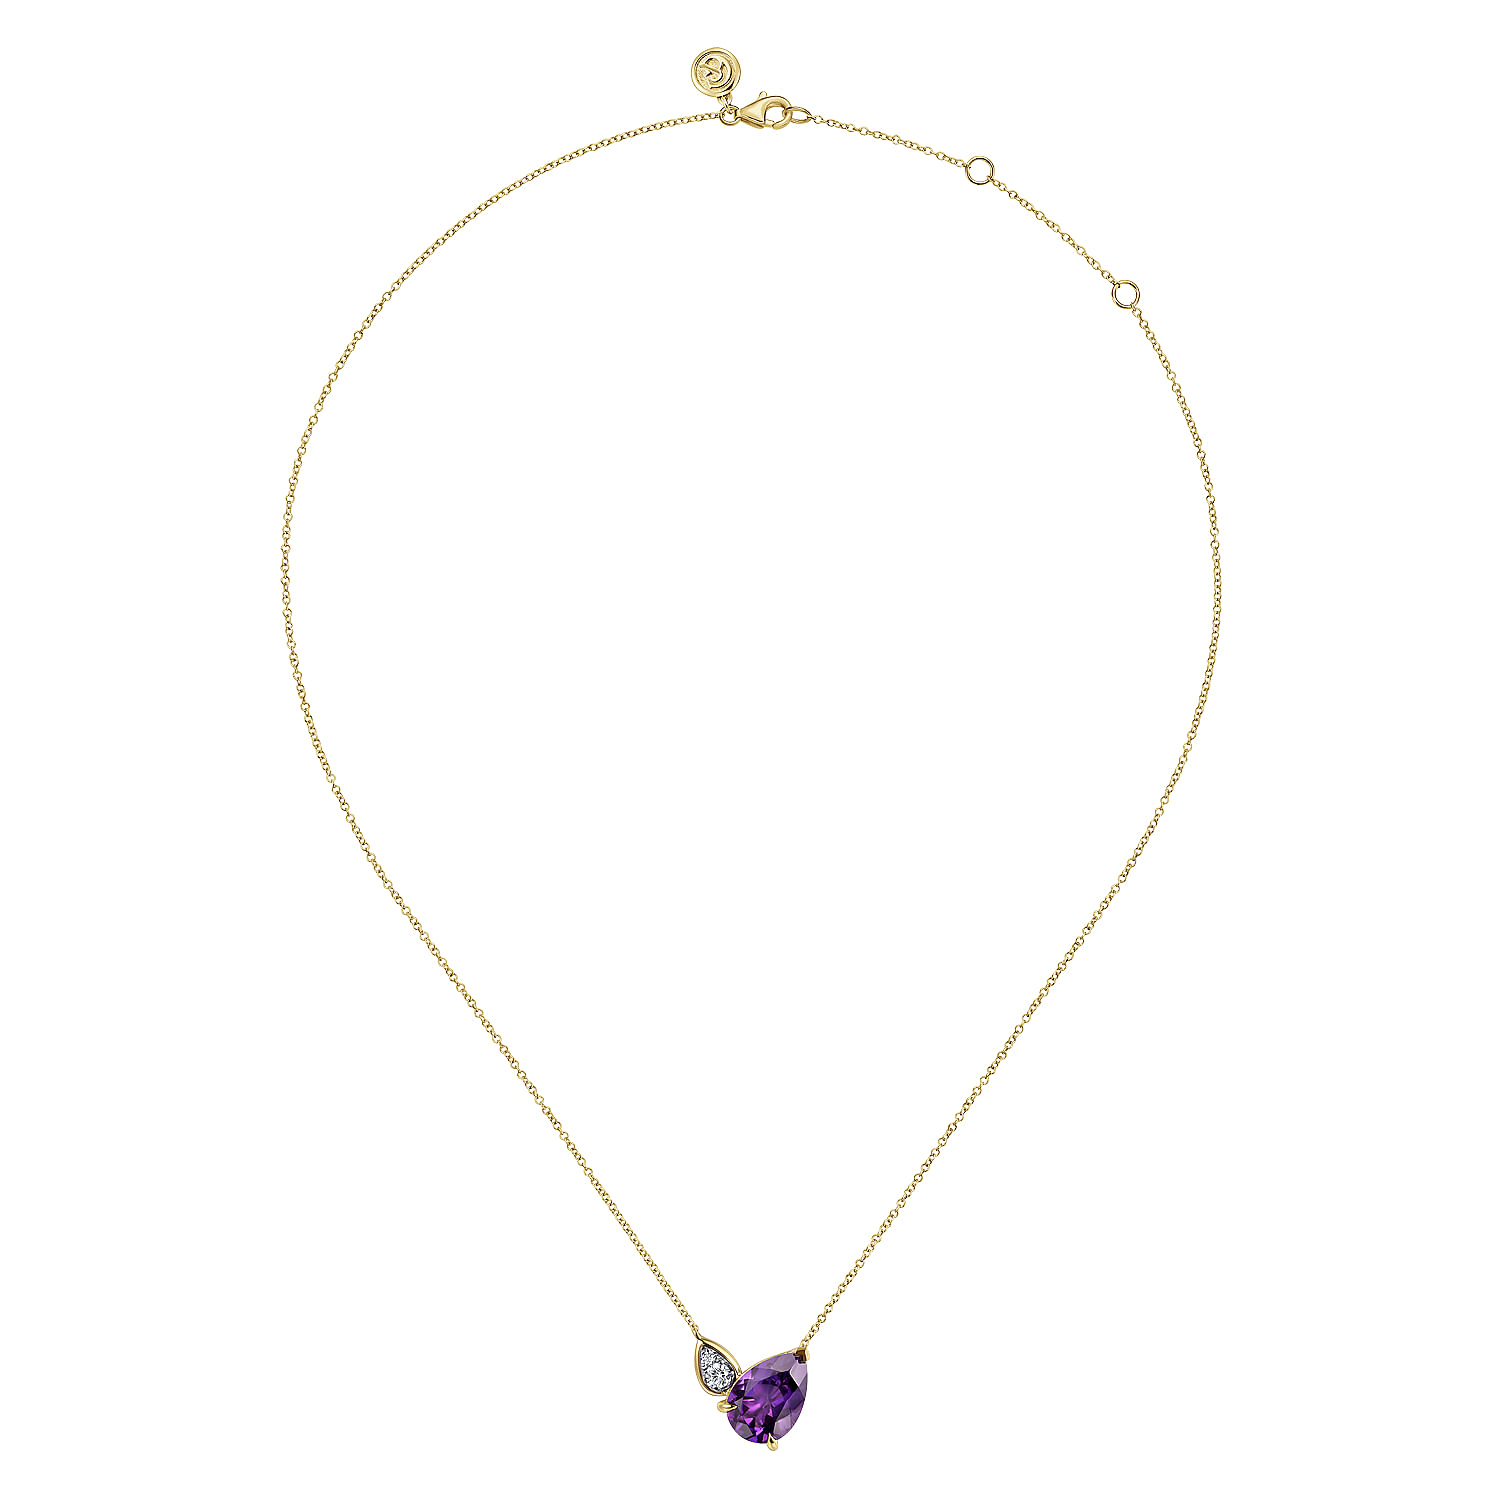 14K White & Yellow Gold Diamond and Amethyst Pendant Necklace